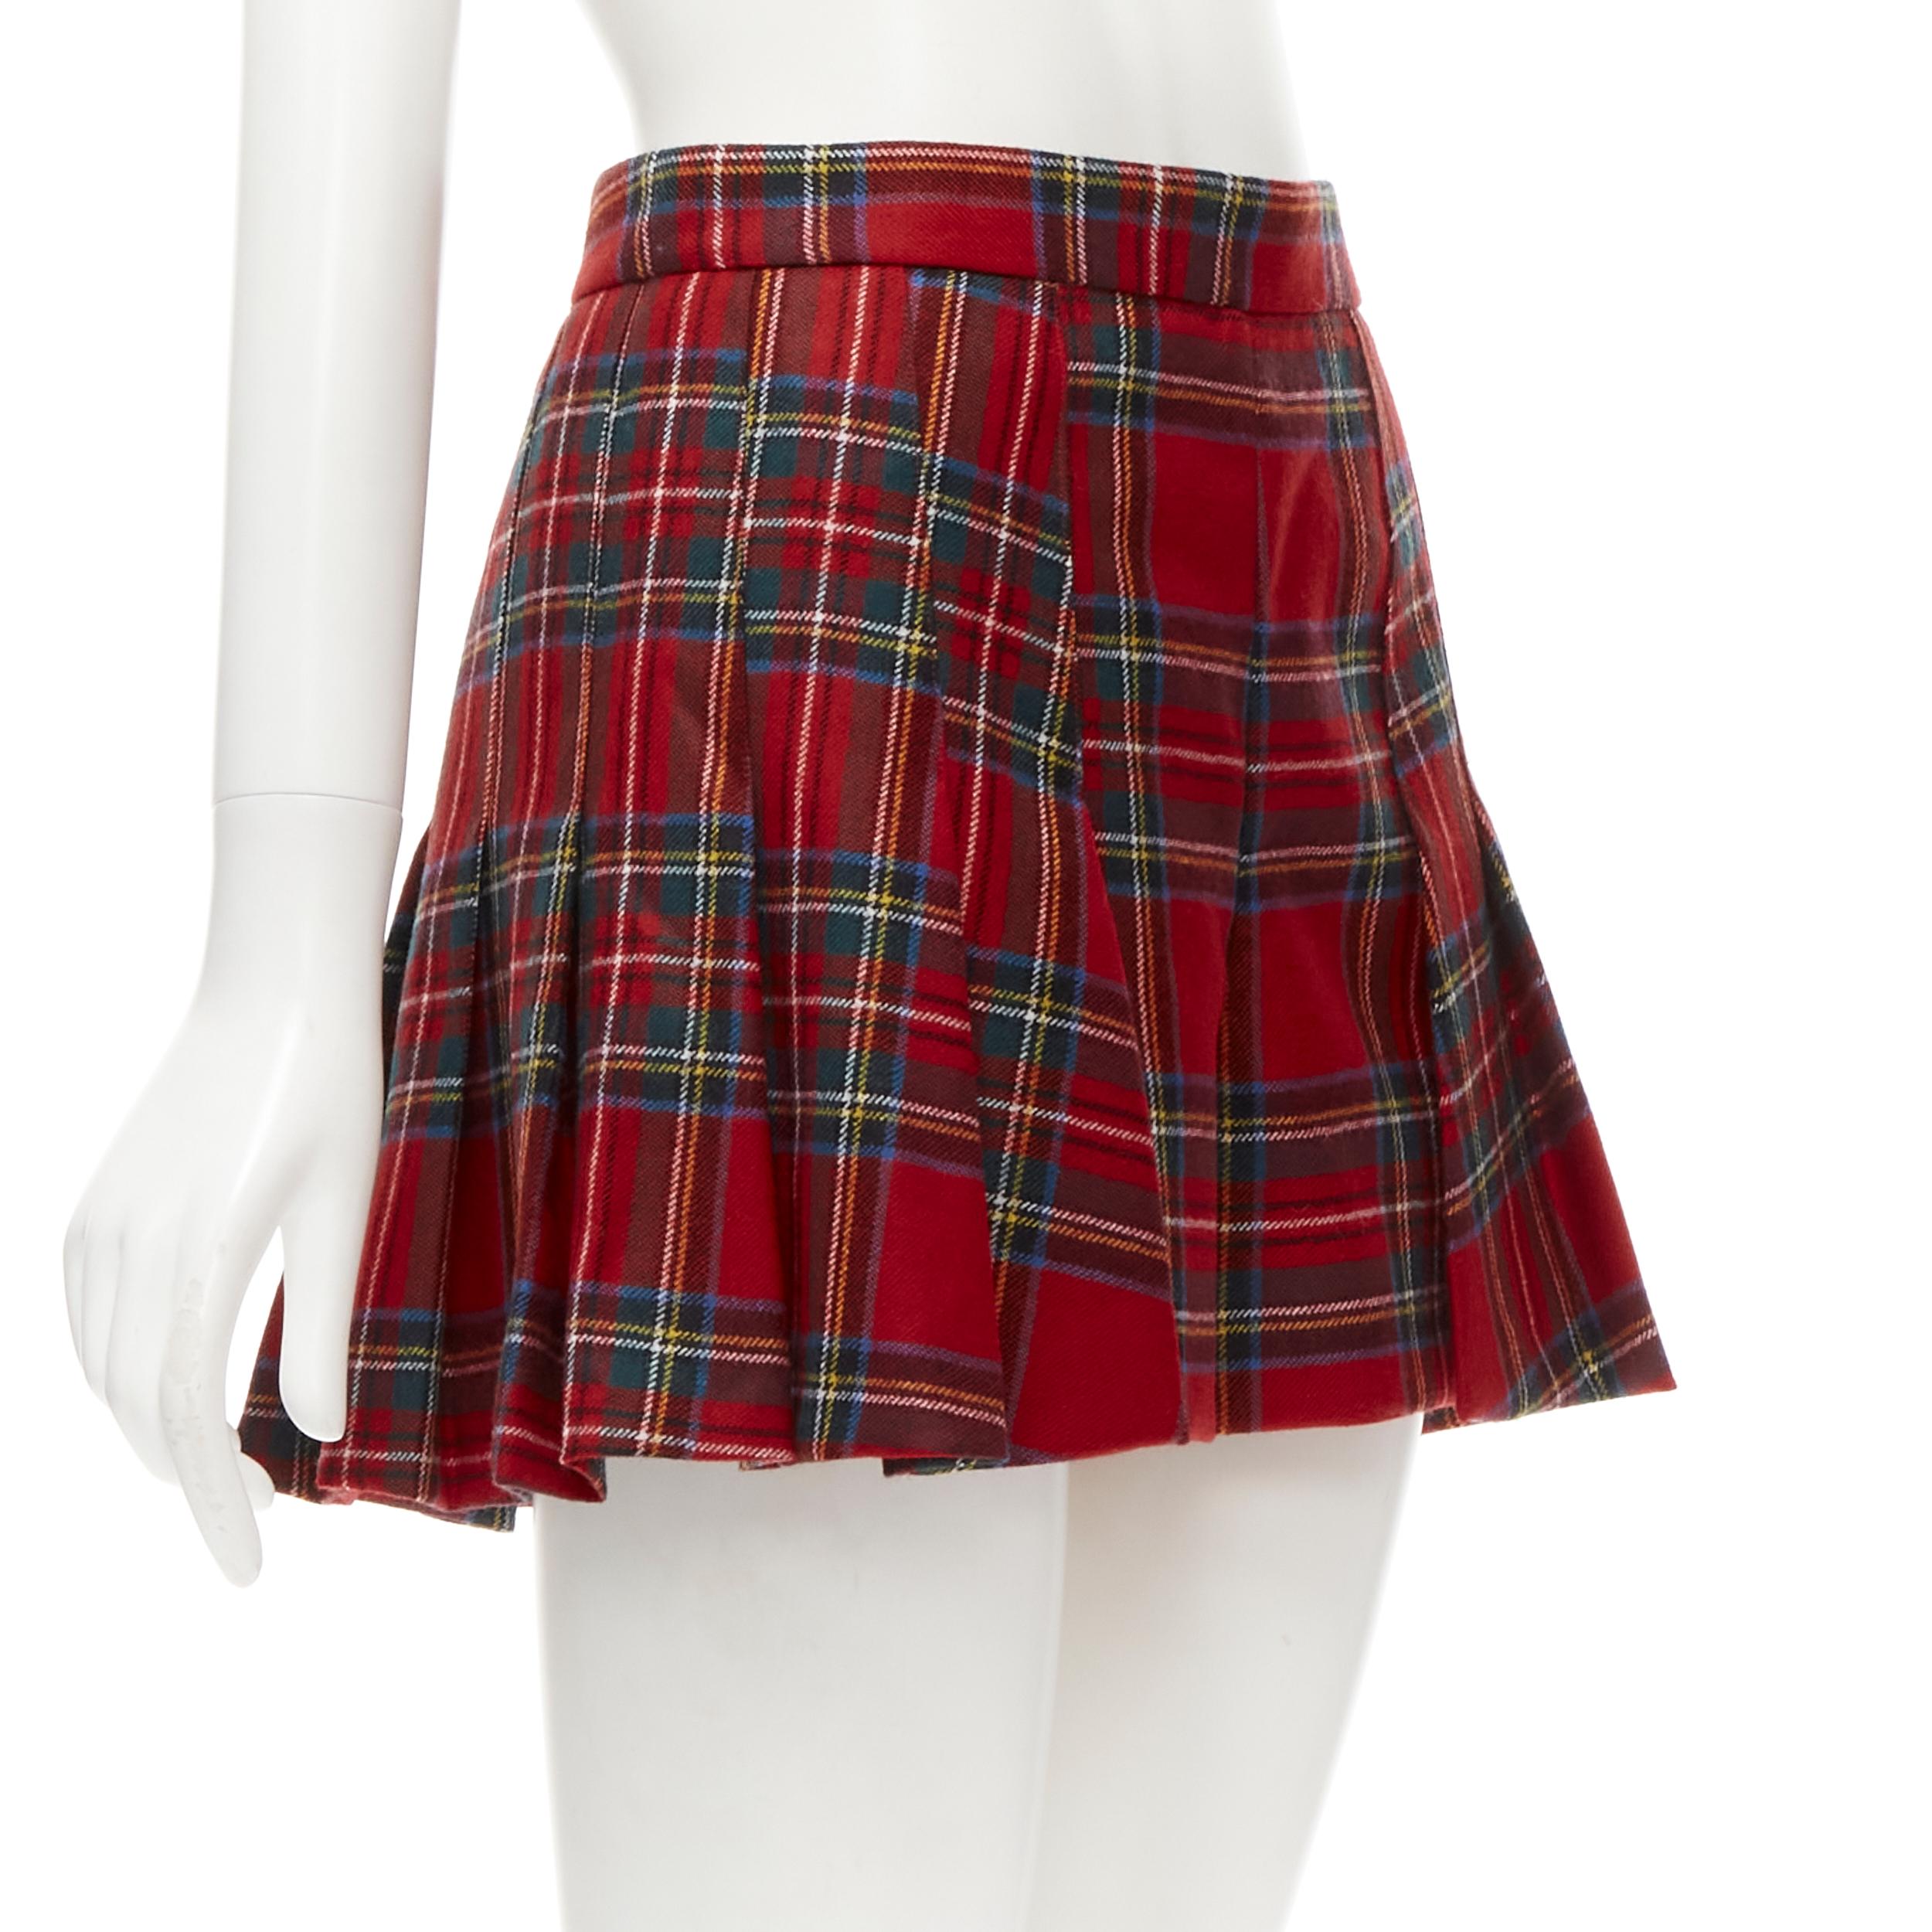 RED VALENTINO 100% virgin woo red tartan plaid high waist skorts IT38 XS
Reference: AAWC/A00367
Brand: Red Valentino
Designer: Pier Paolo Piccioli
Material: Virgin Wool
Color: Red
Pattern: Plaid
Closure: Zip
Made in: Romania

CONDITION:
Condition: